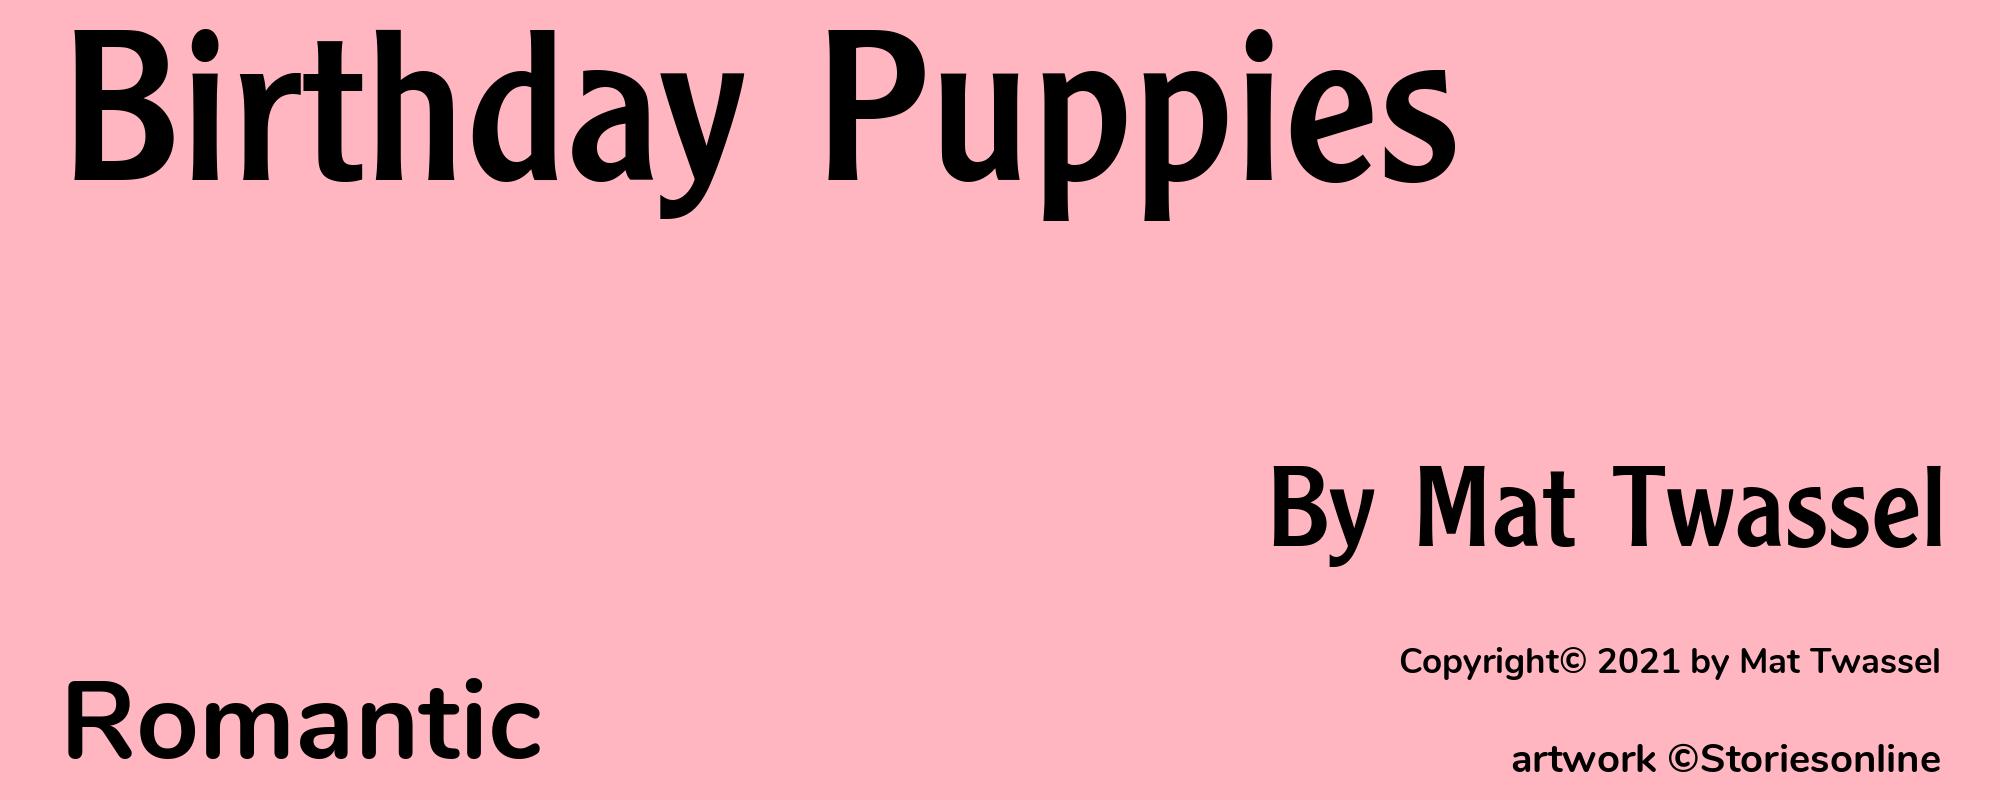 Birthday Puppies - Cover